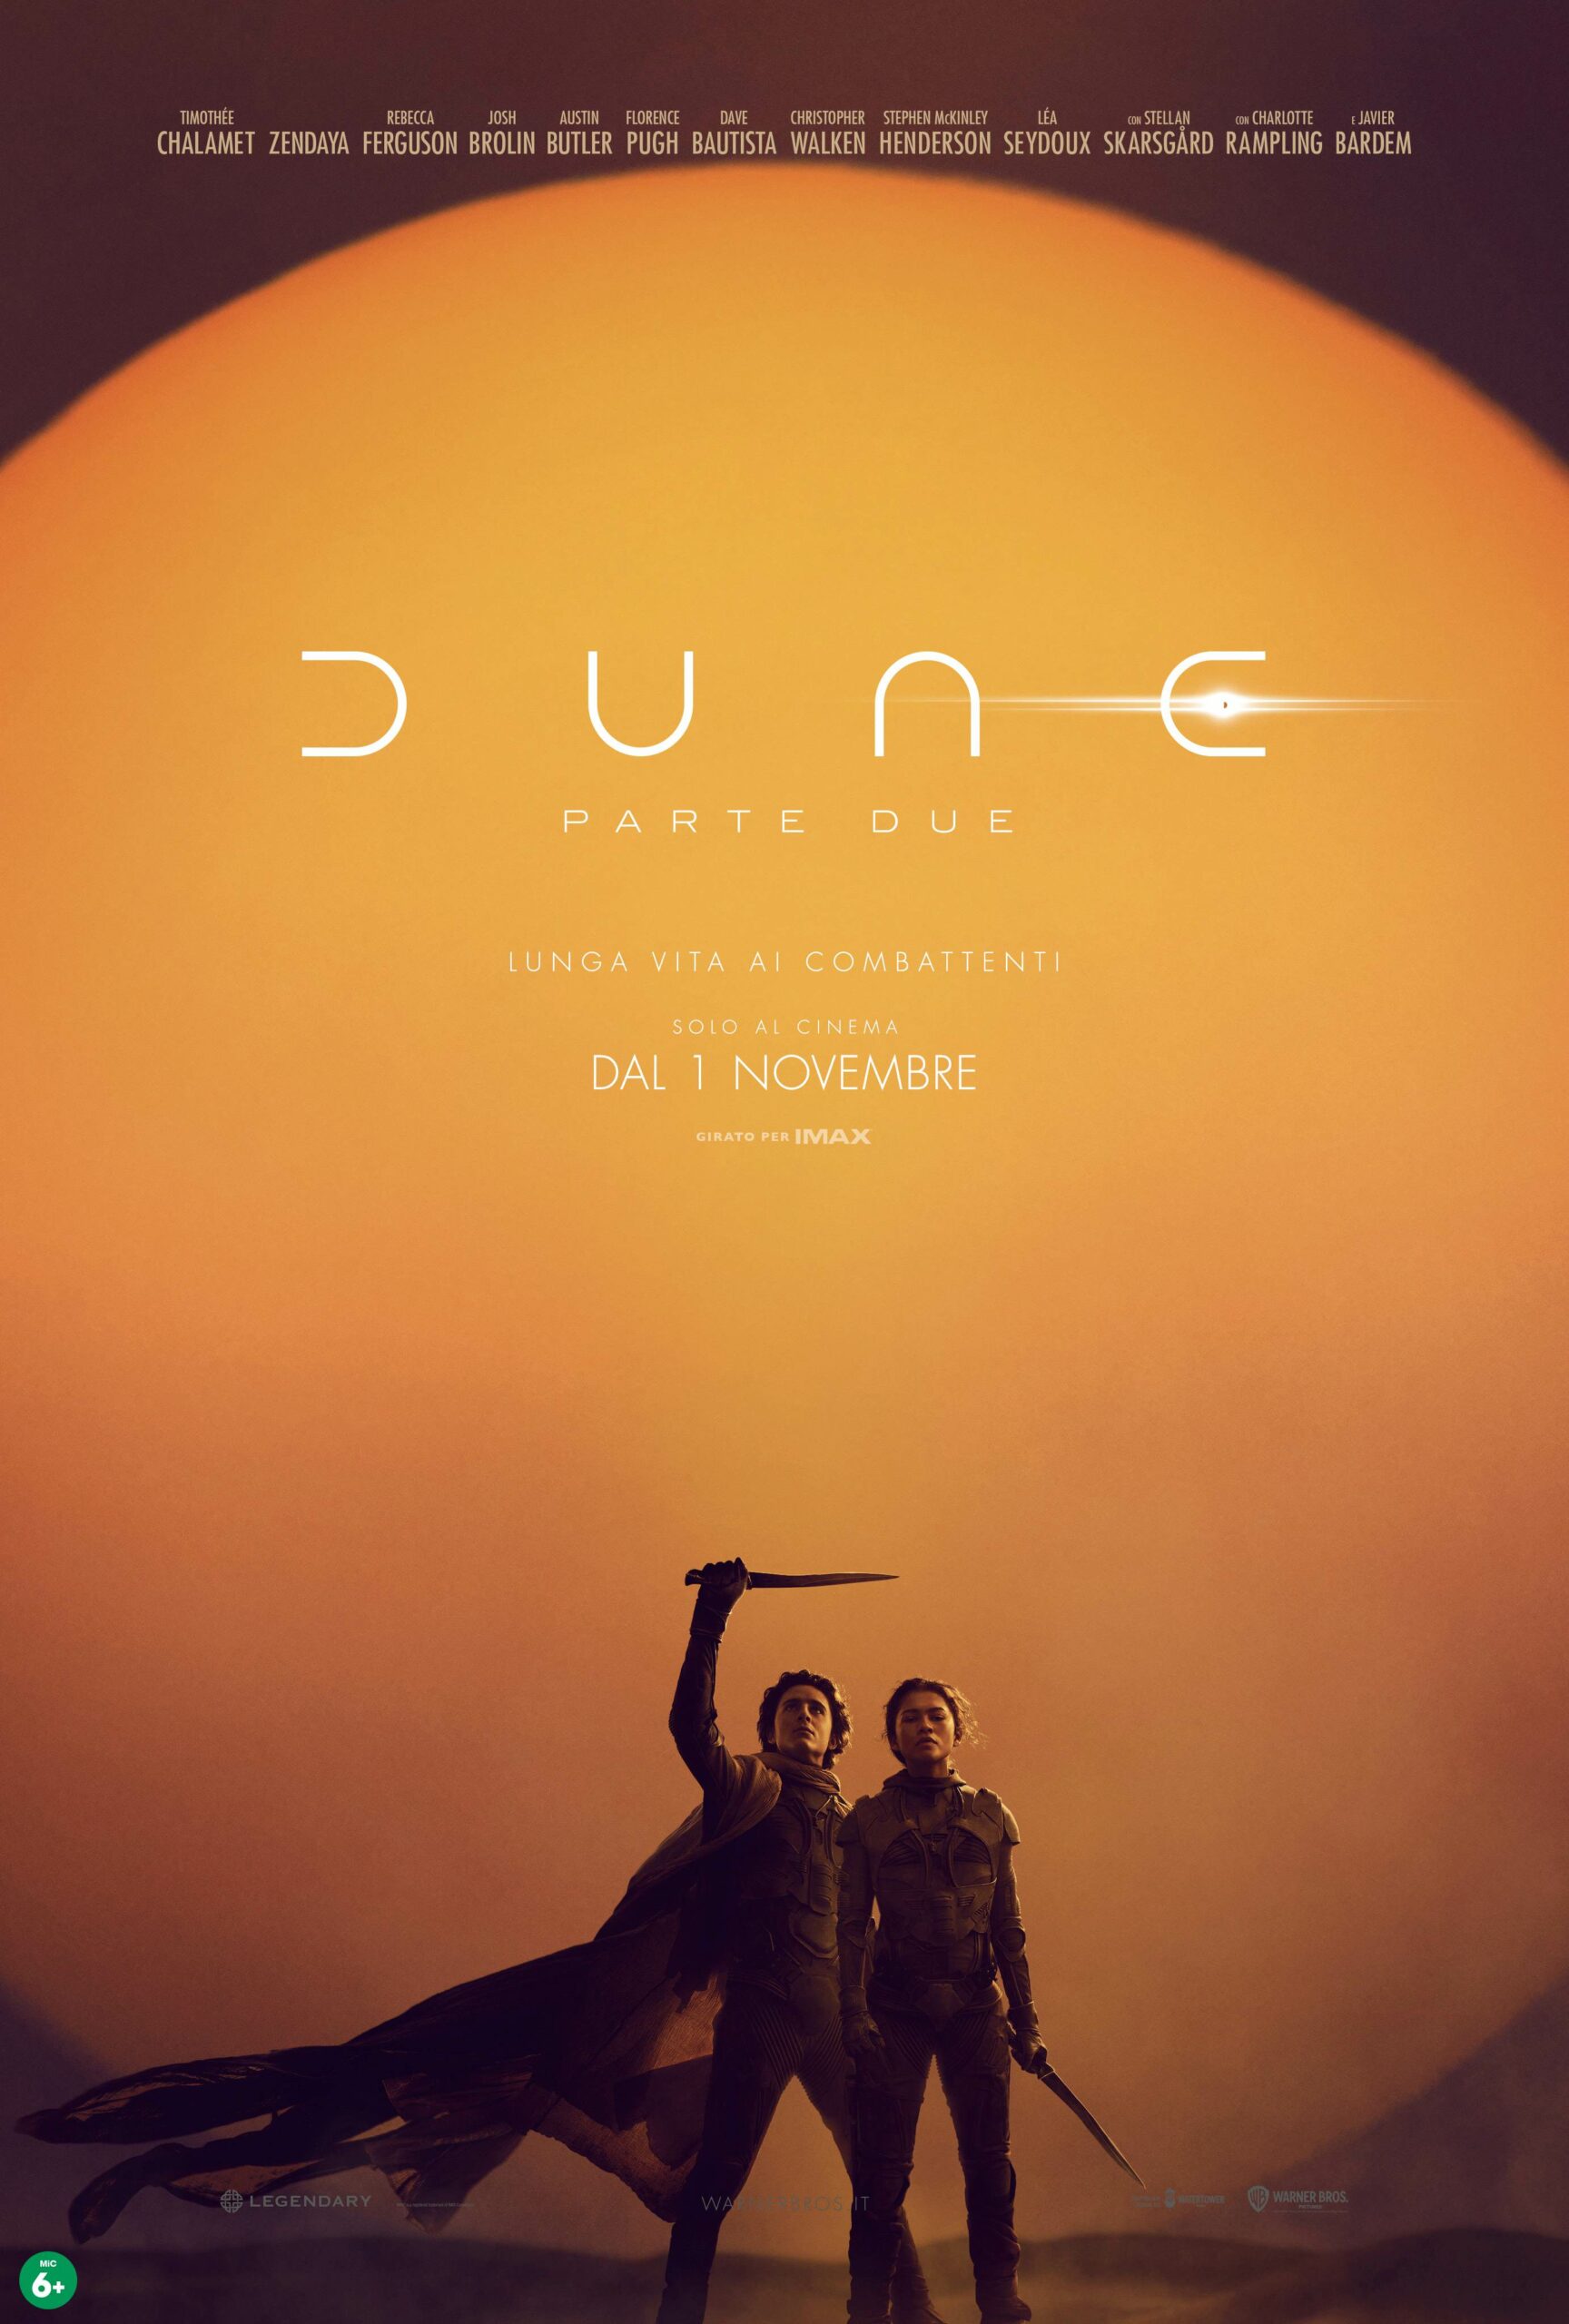 Not even wrong: Villeneuve’s Dune flawed and disjointed journey. Dune parte 2 (Villeneuve, 2024), or The Curse of «Auteur flicks» in the Age of «Rule of Cool»